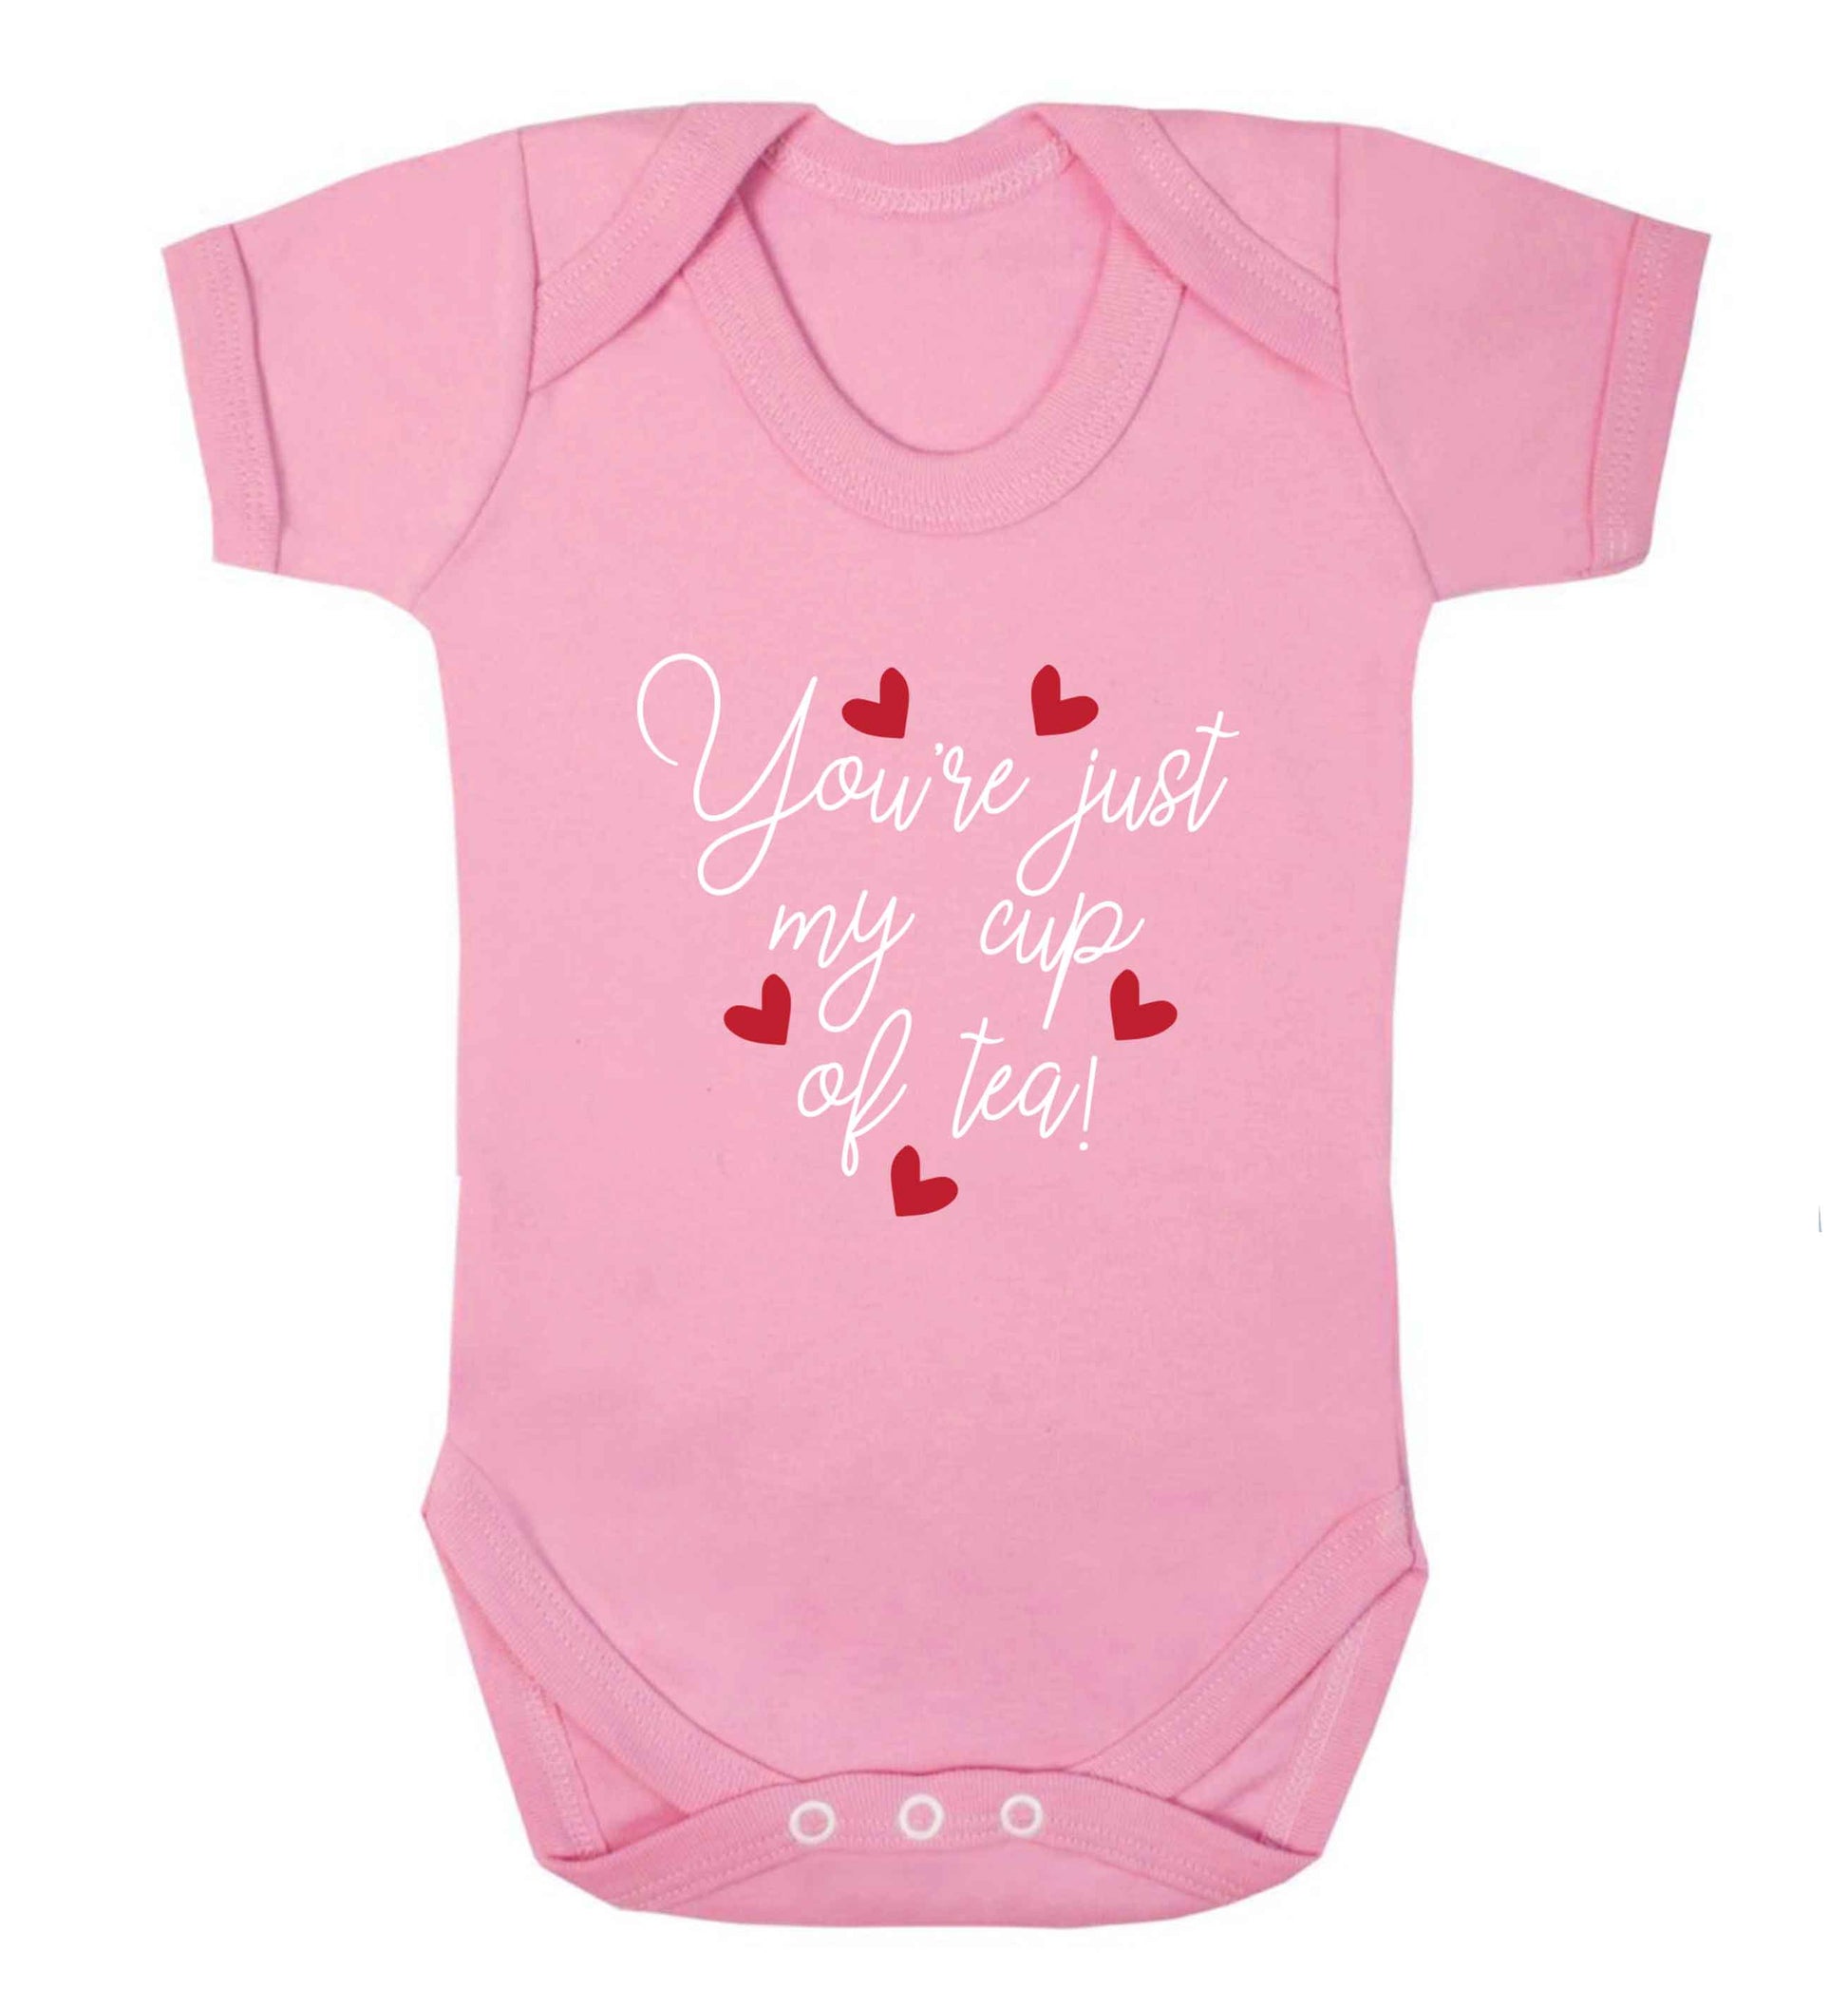 You're just my cup of tea baby vest pale pink 18-24 months